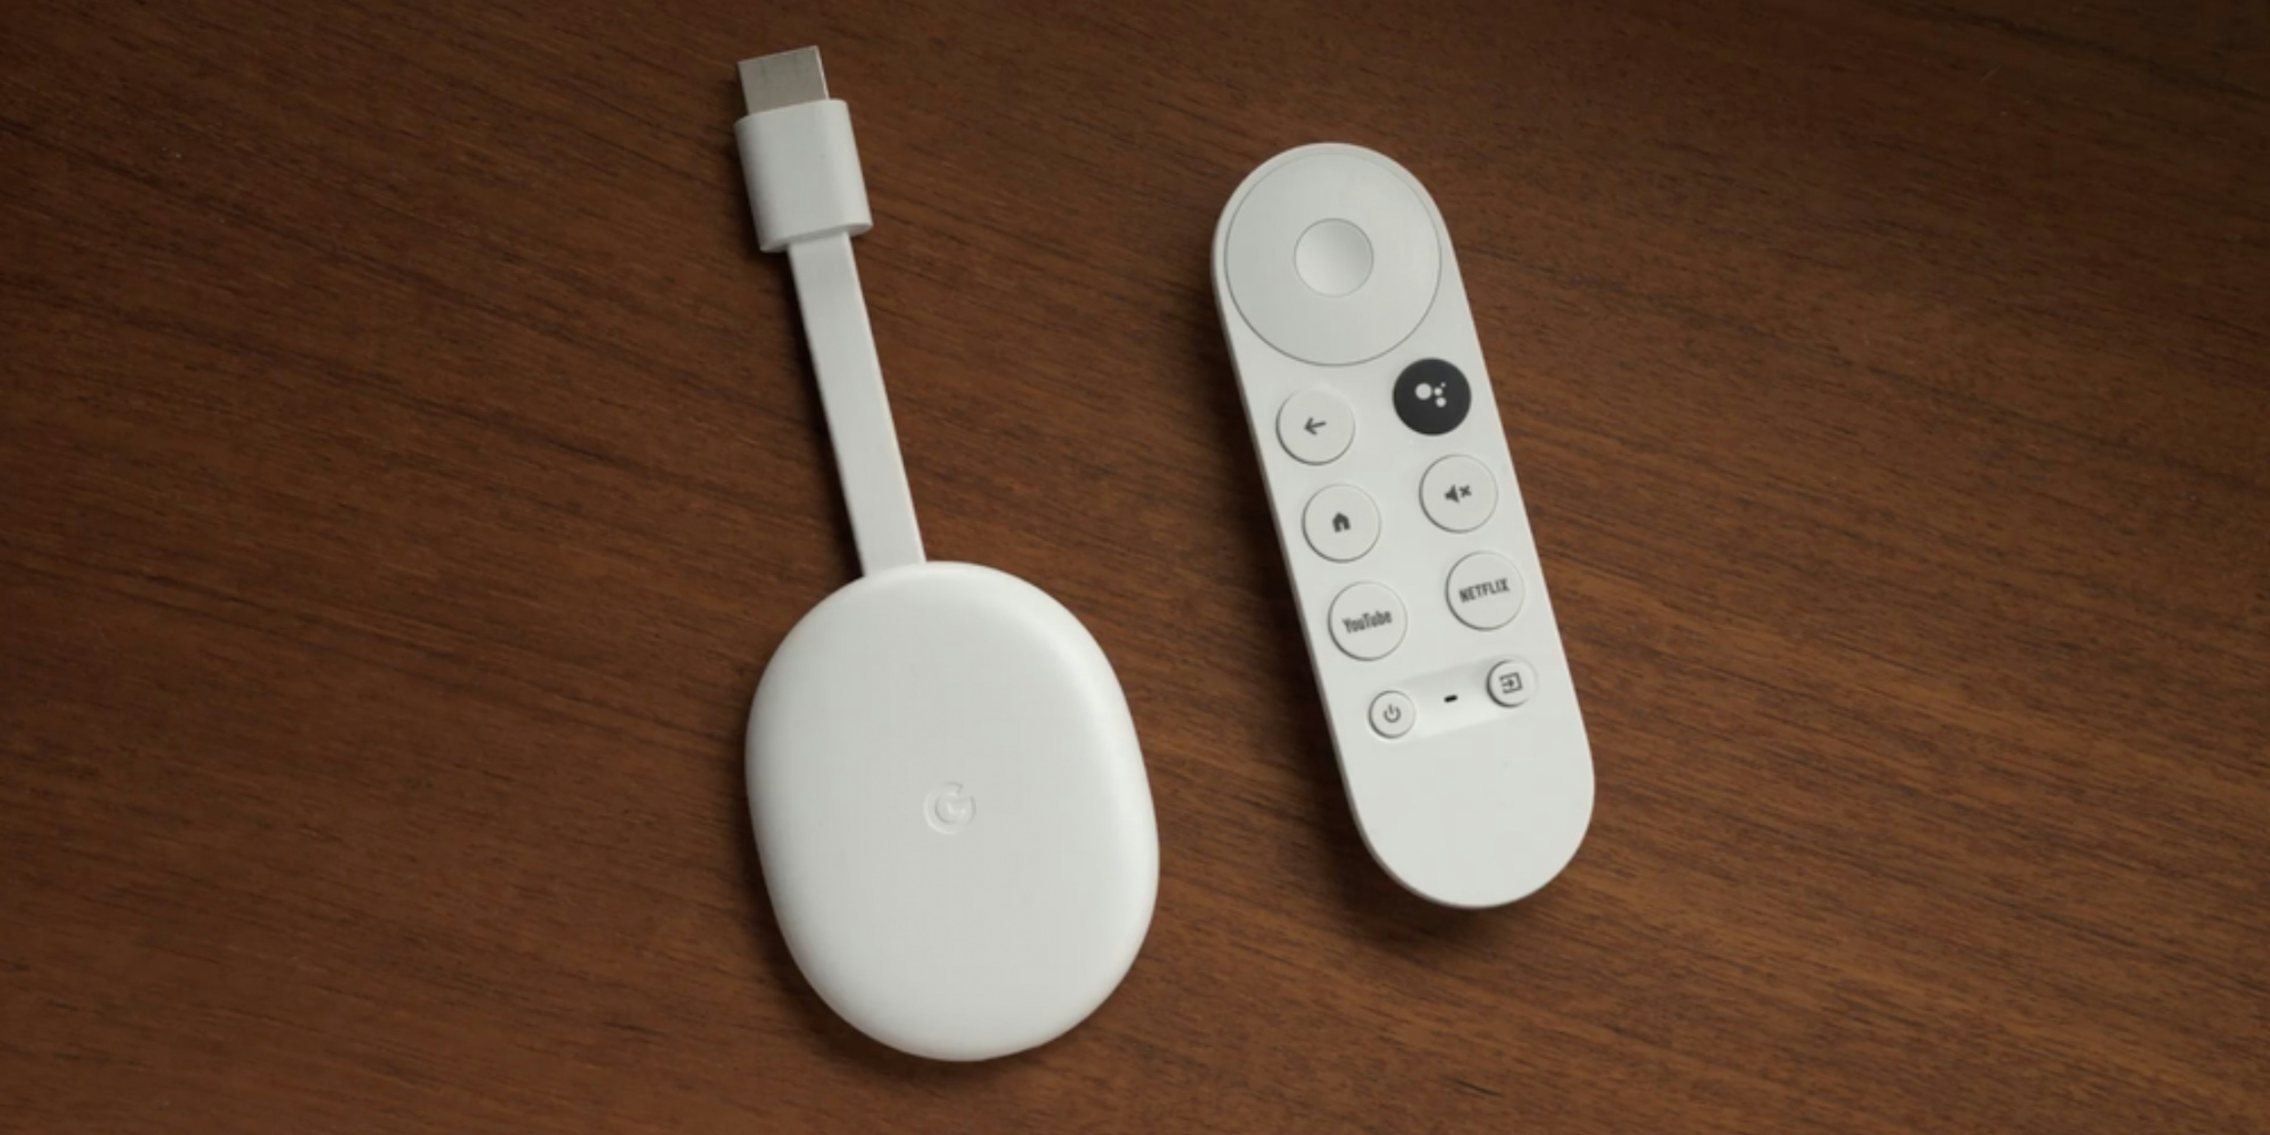 What Is Chromecast, and How Does It Work? Cost, Apps, and More